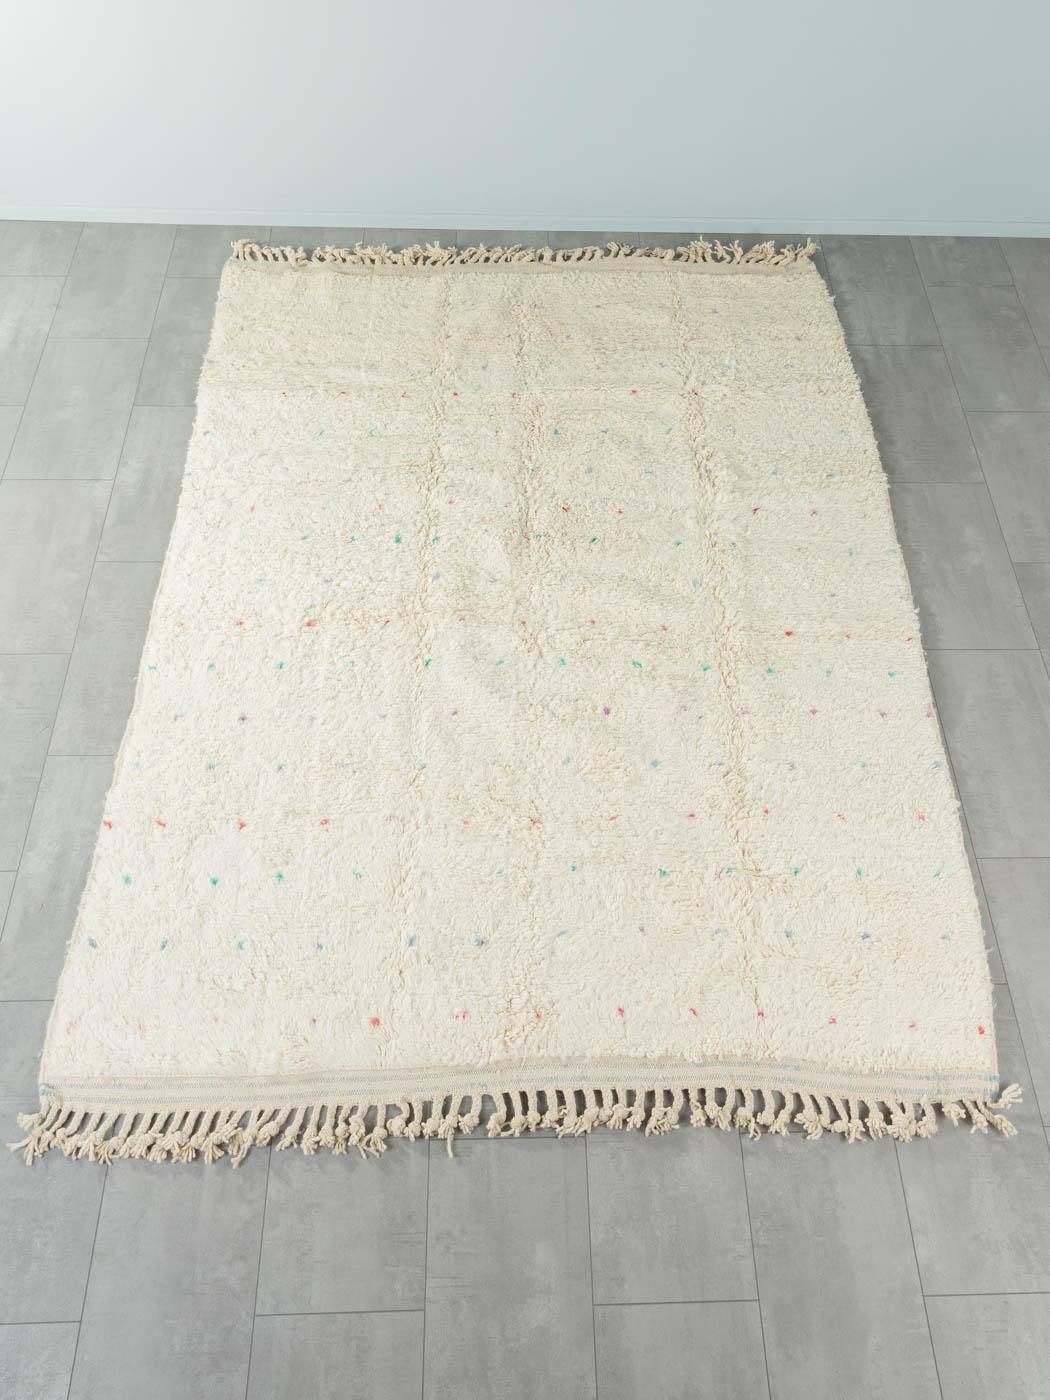 Pastel Dots is a contemporary 100% wool rug – thick and soft, comfortable underfoot. Our Berber rugs are handwoven and handknotted by Amazigh women in the Atlas Mountains. These communities have been crafting rugs for thousands of years. One knot at